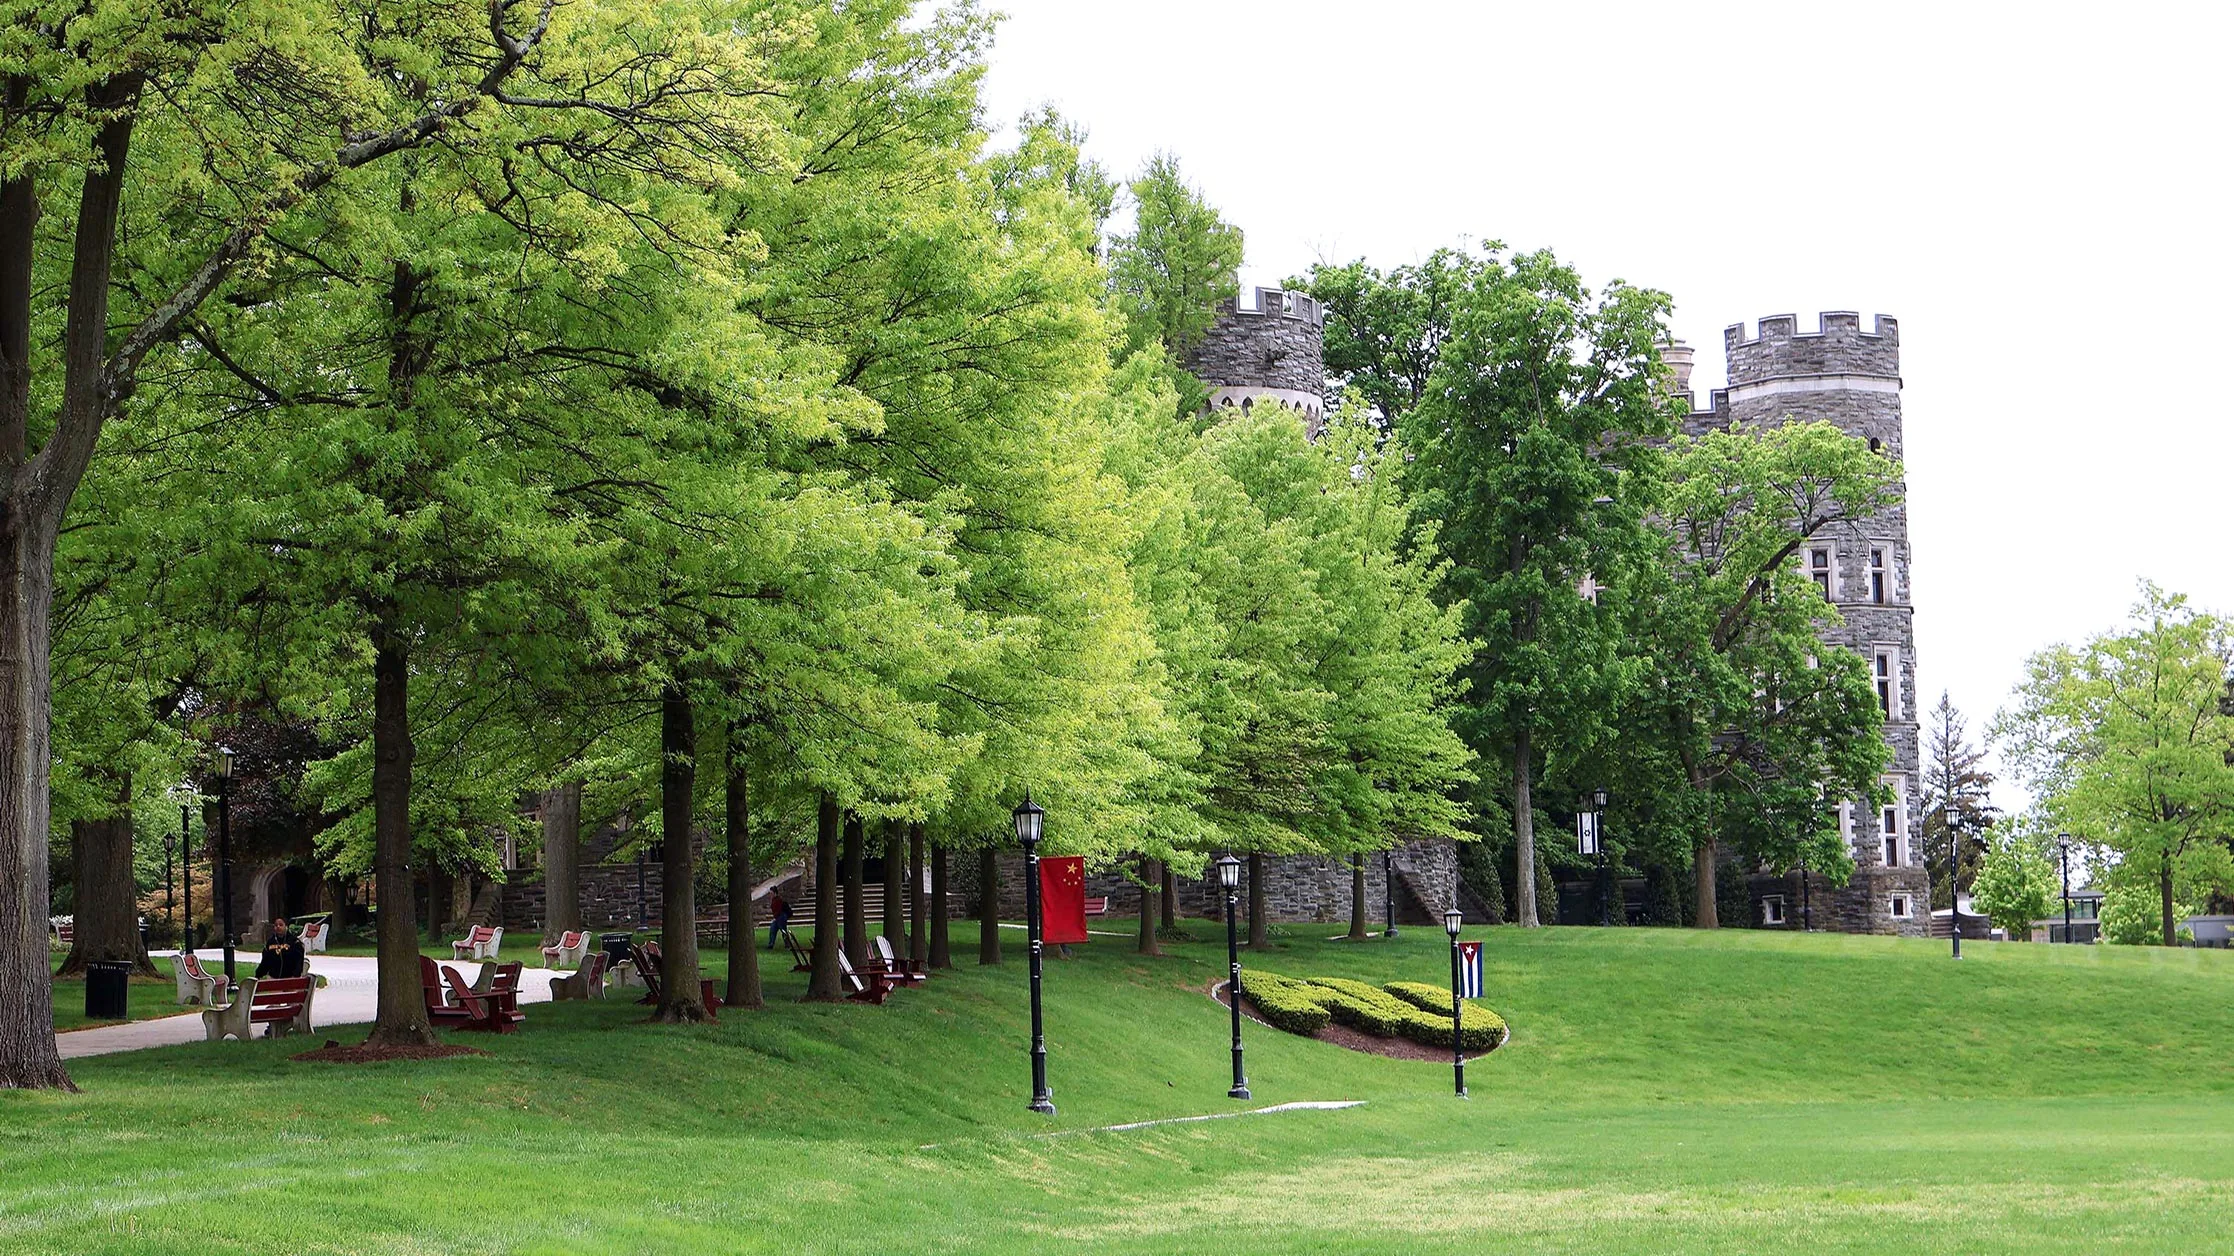 The bright green lawn at Arcadia University on a spring day.